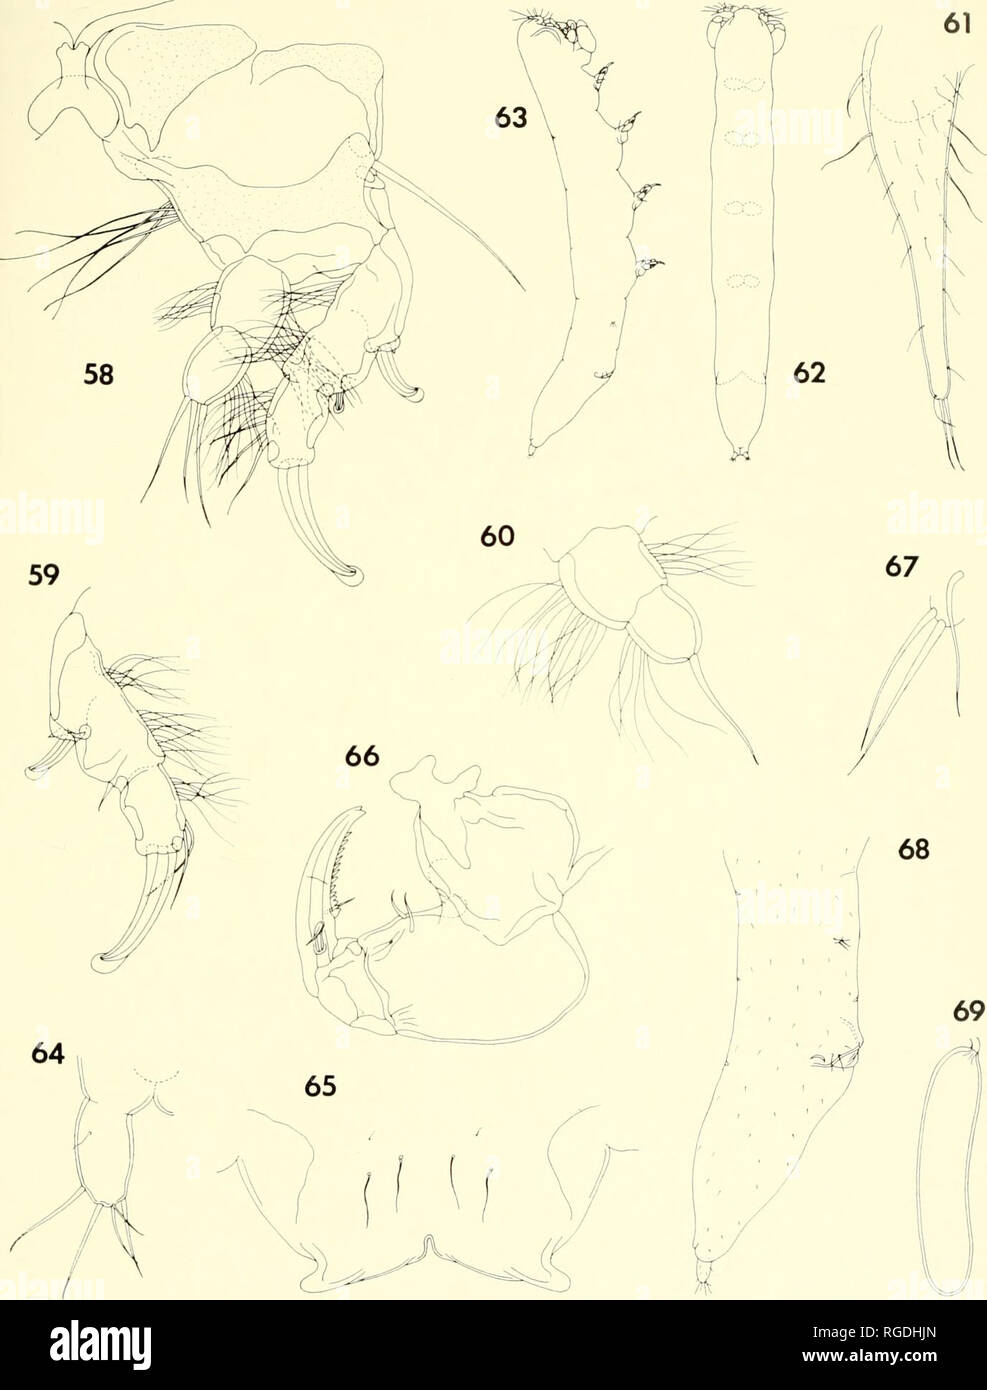 . Bulletin of the Museum of Comparative Zoology at Harvard College. Zoology. Parasitic Copepods from Corals in Madagascar • Humes and Ho 443. Figures 58-61. Xori7/o decorafo n. sp., female (continued). 58, leg I and intercoxal plate, posterior (D); 59, exopod of leg 2, posterior (D); 60, endopod of leg 3, posterior (D); 61, leg 5, lateral jF). Figures 62-69. Xanfia decorota n. sp., male. 62, body, dorsal |A); 63, body, lateral (A); 64, caudal ramus, ventral (C); 65, labrum, ventral (D); 66, maxilliped, inner (G); 67, leg 5, lateral (D); 68, urosome, lateral (B); 69, spermato- phore, attached t Stock Photo